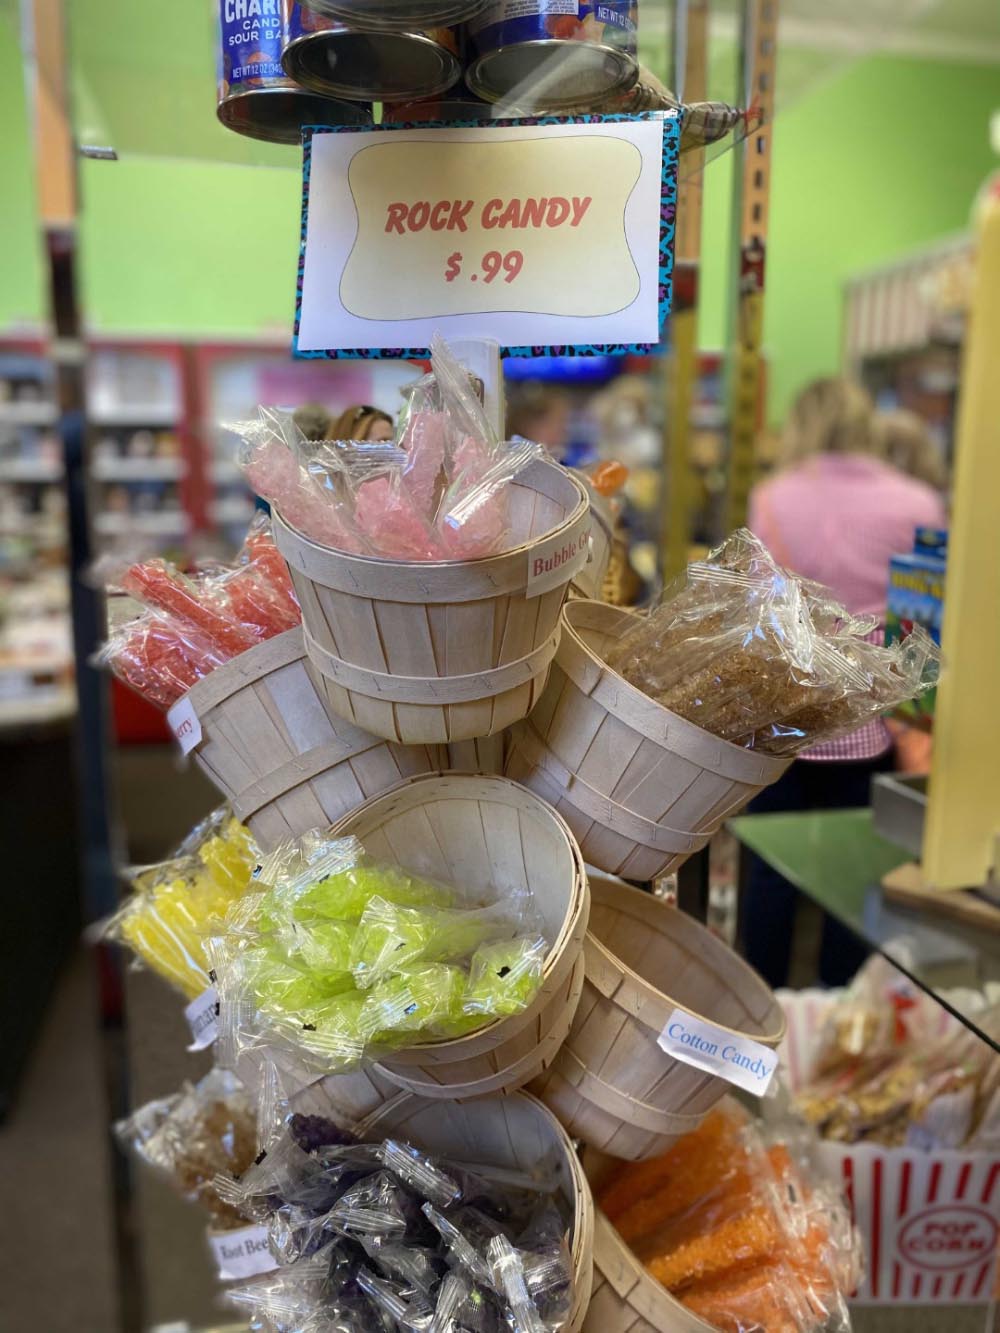 Victorian Candy Company rock candy